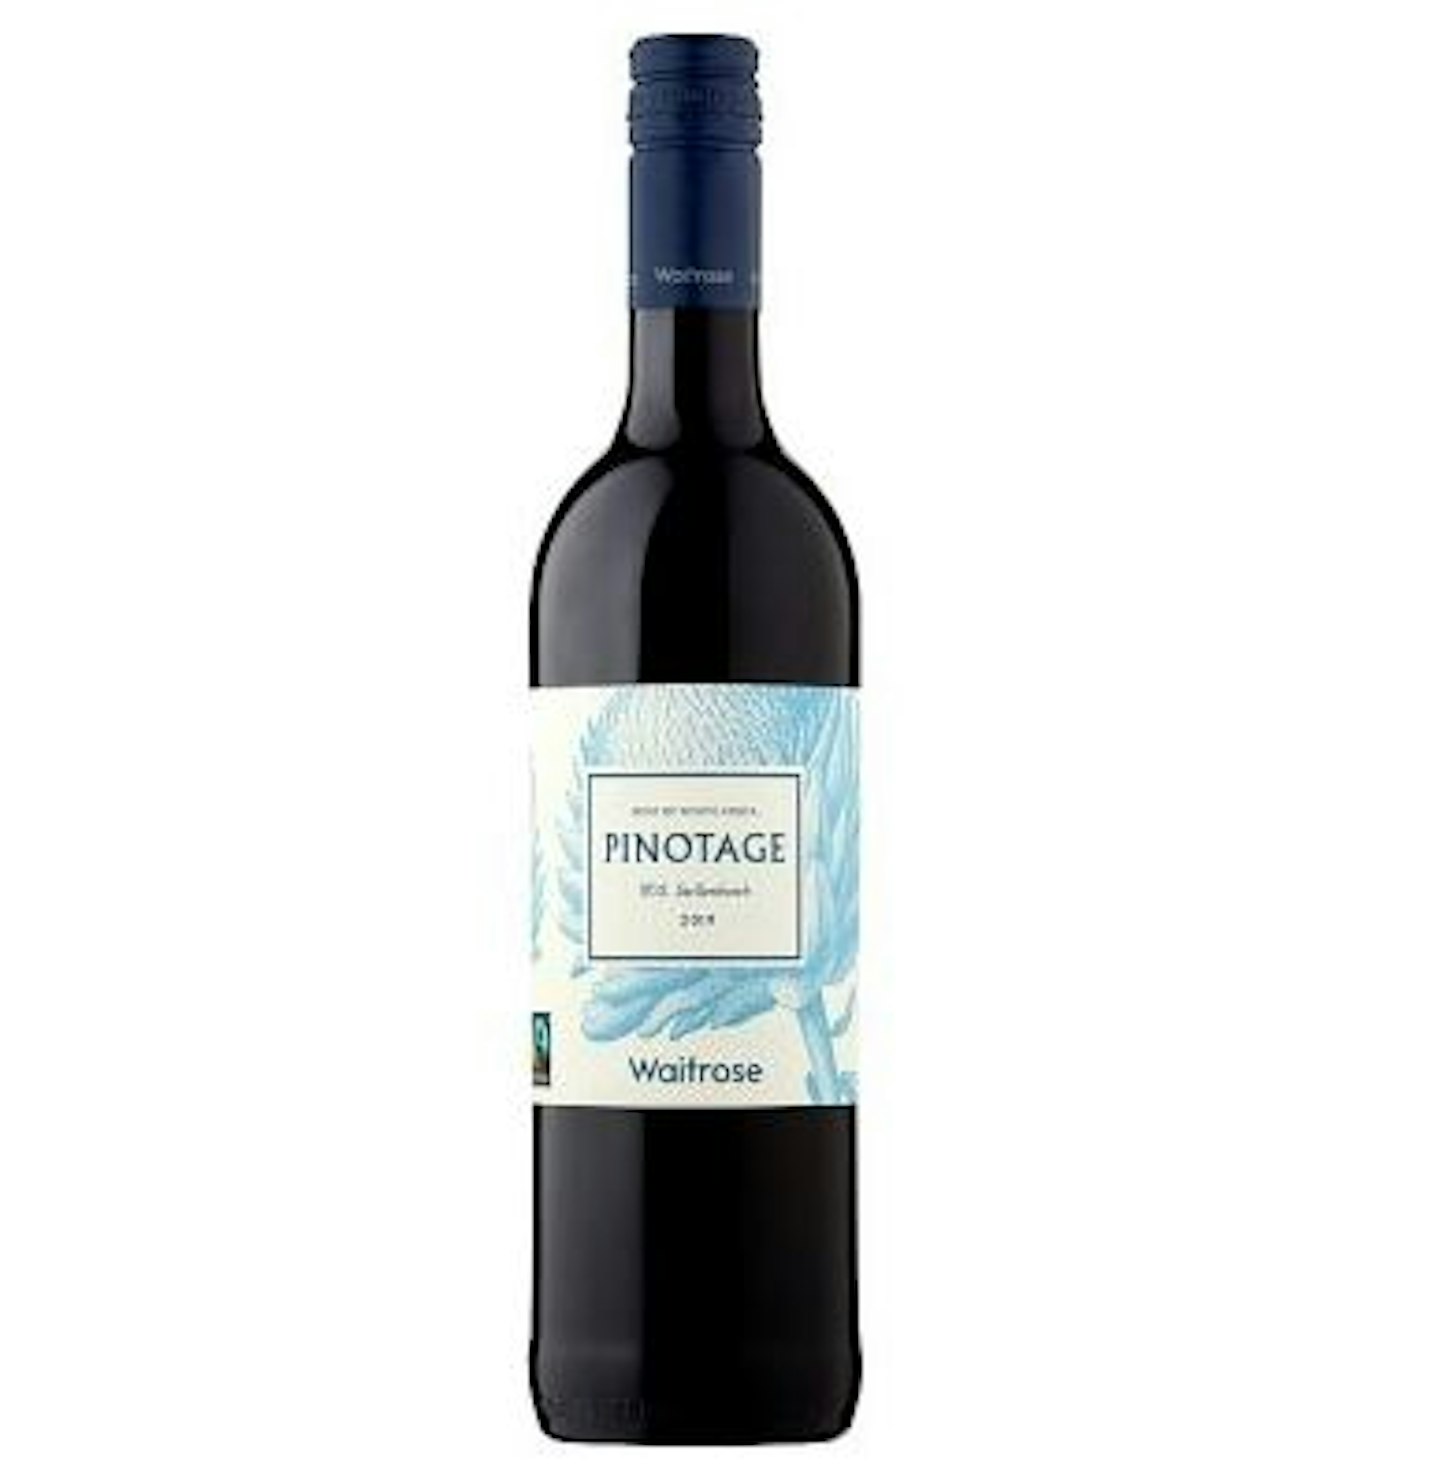 Best for making mulled wine: Waitrose Fairtrade Pinotage | South Africa | 14%